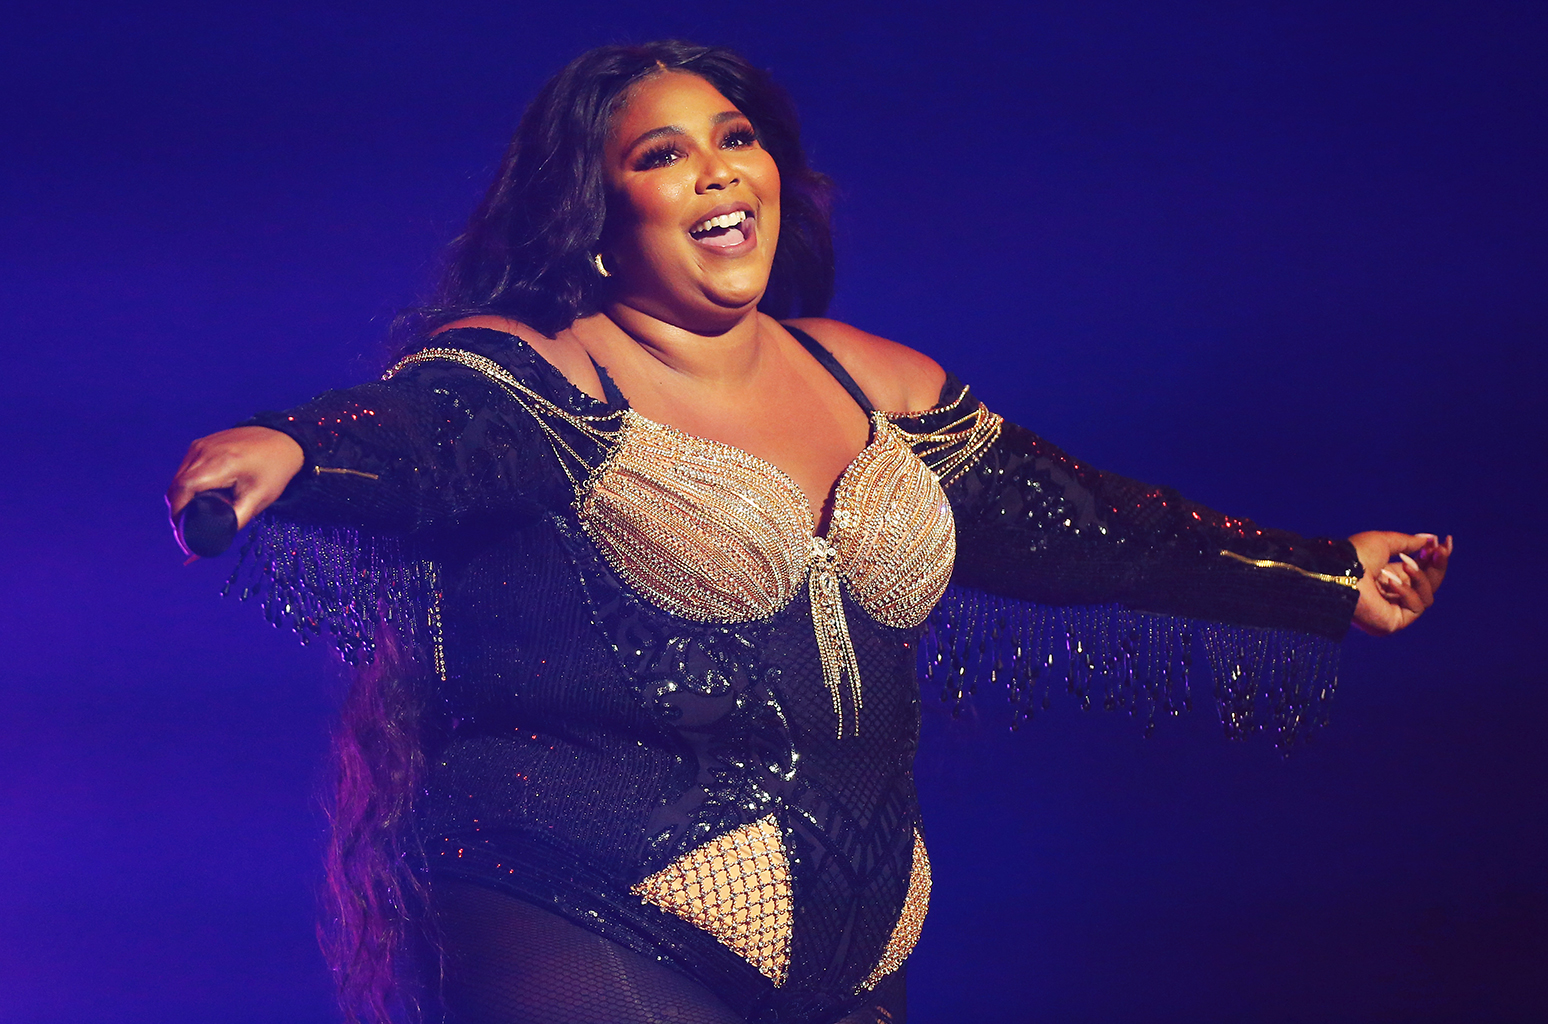 Funny, Inspirational &amp; 'Good as Hell': See Lizzo's 10 Best Tweets - www.billboard.com